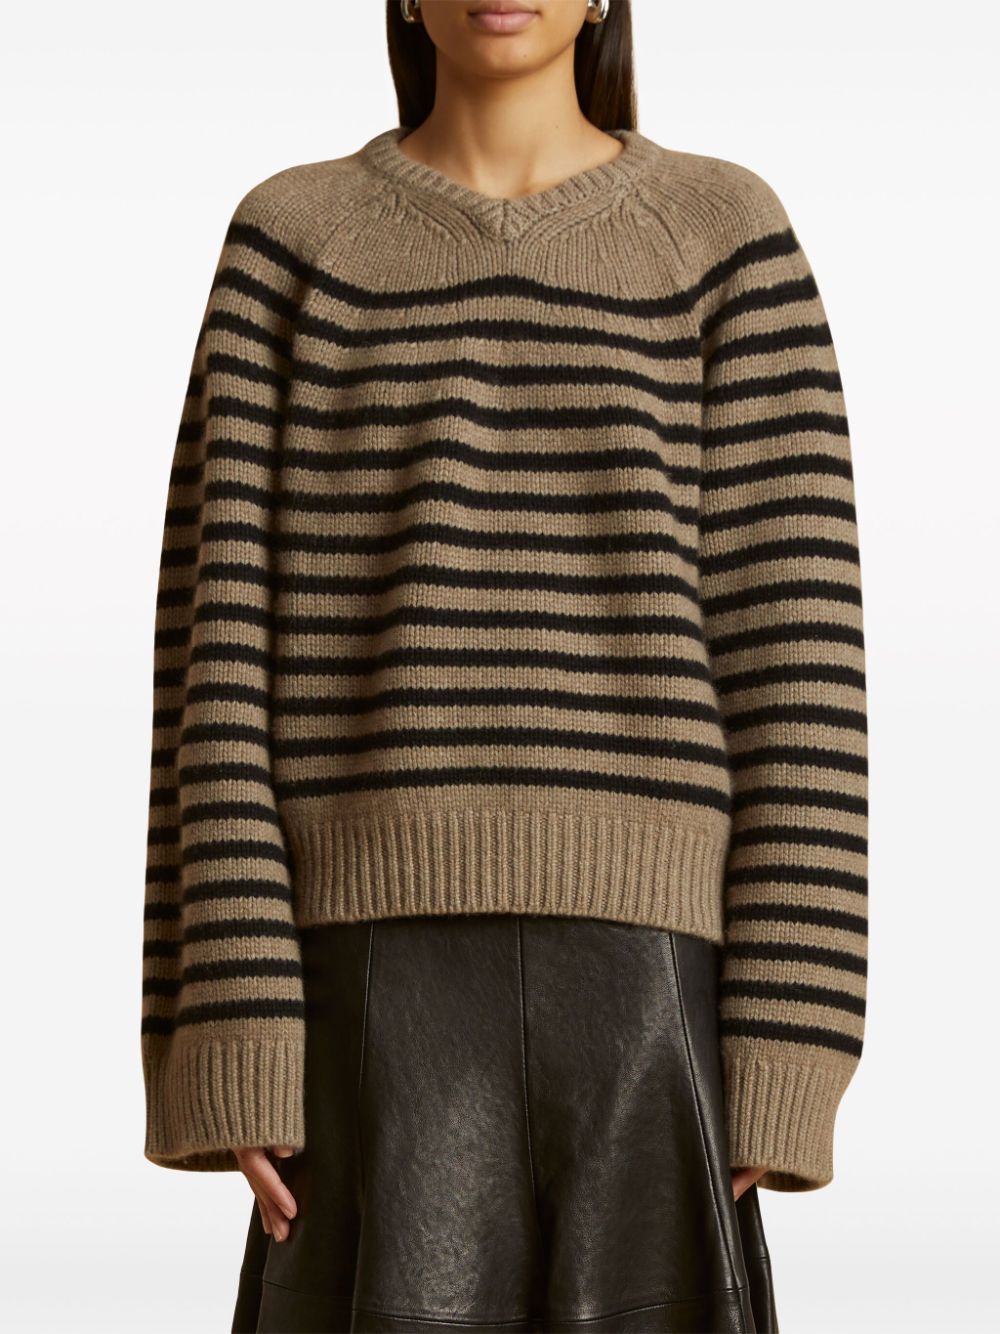 KHAITE Striped Cashmere Jumper with Split Neck and Ribbed Cuffs for Women